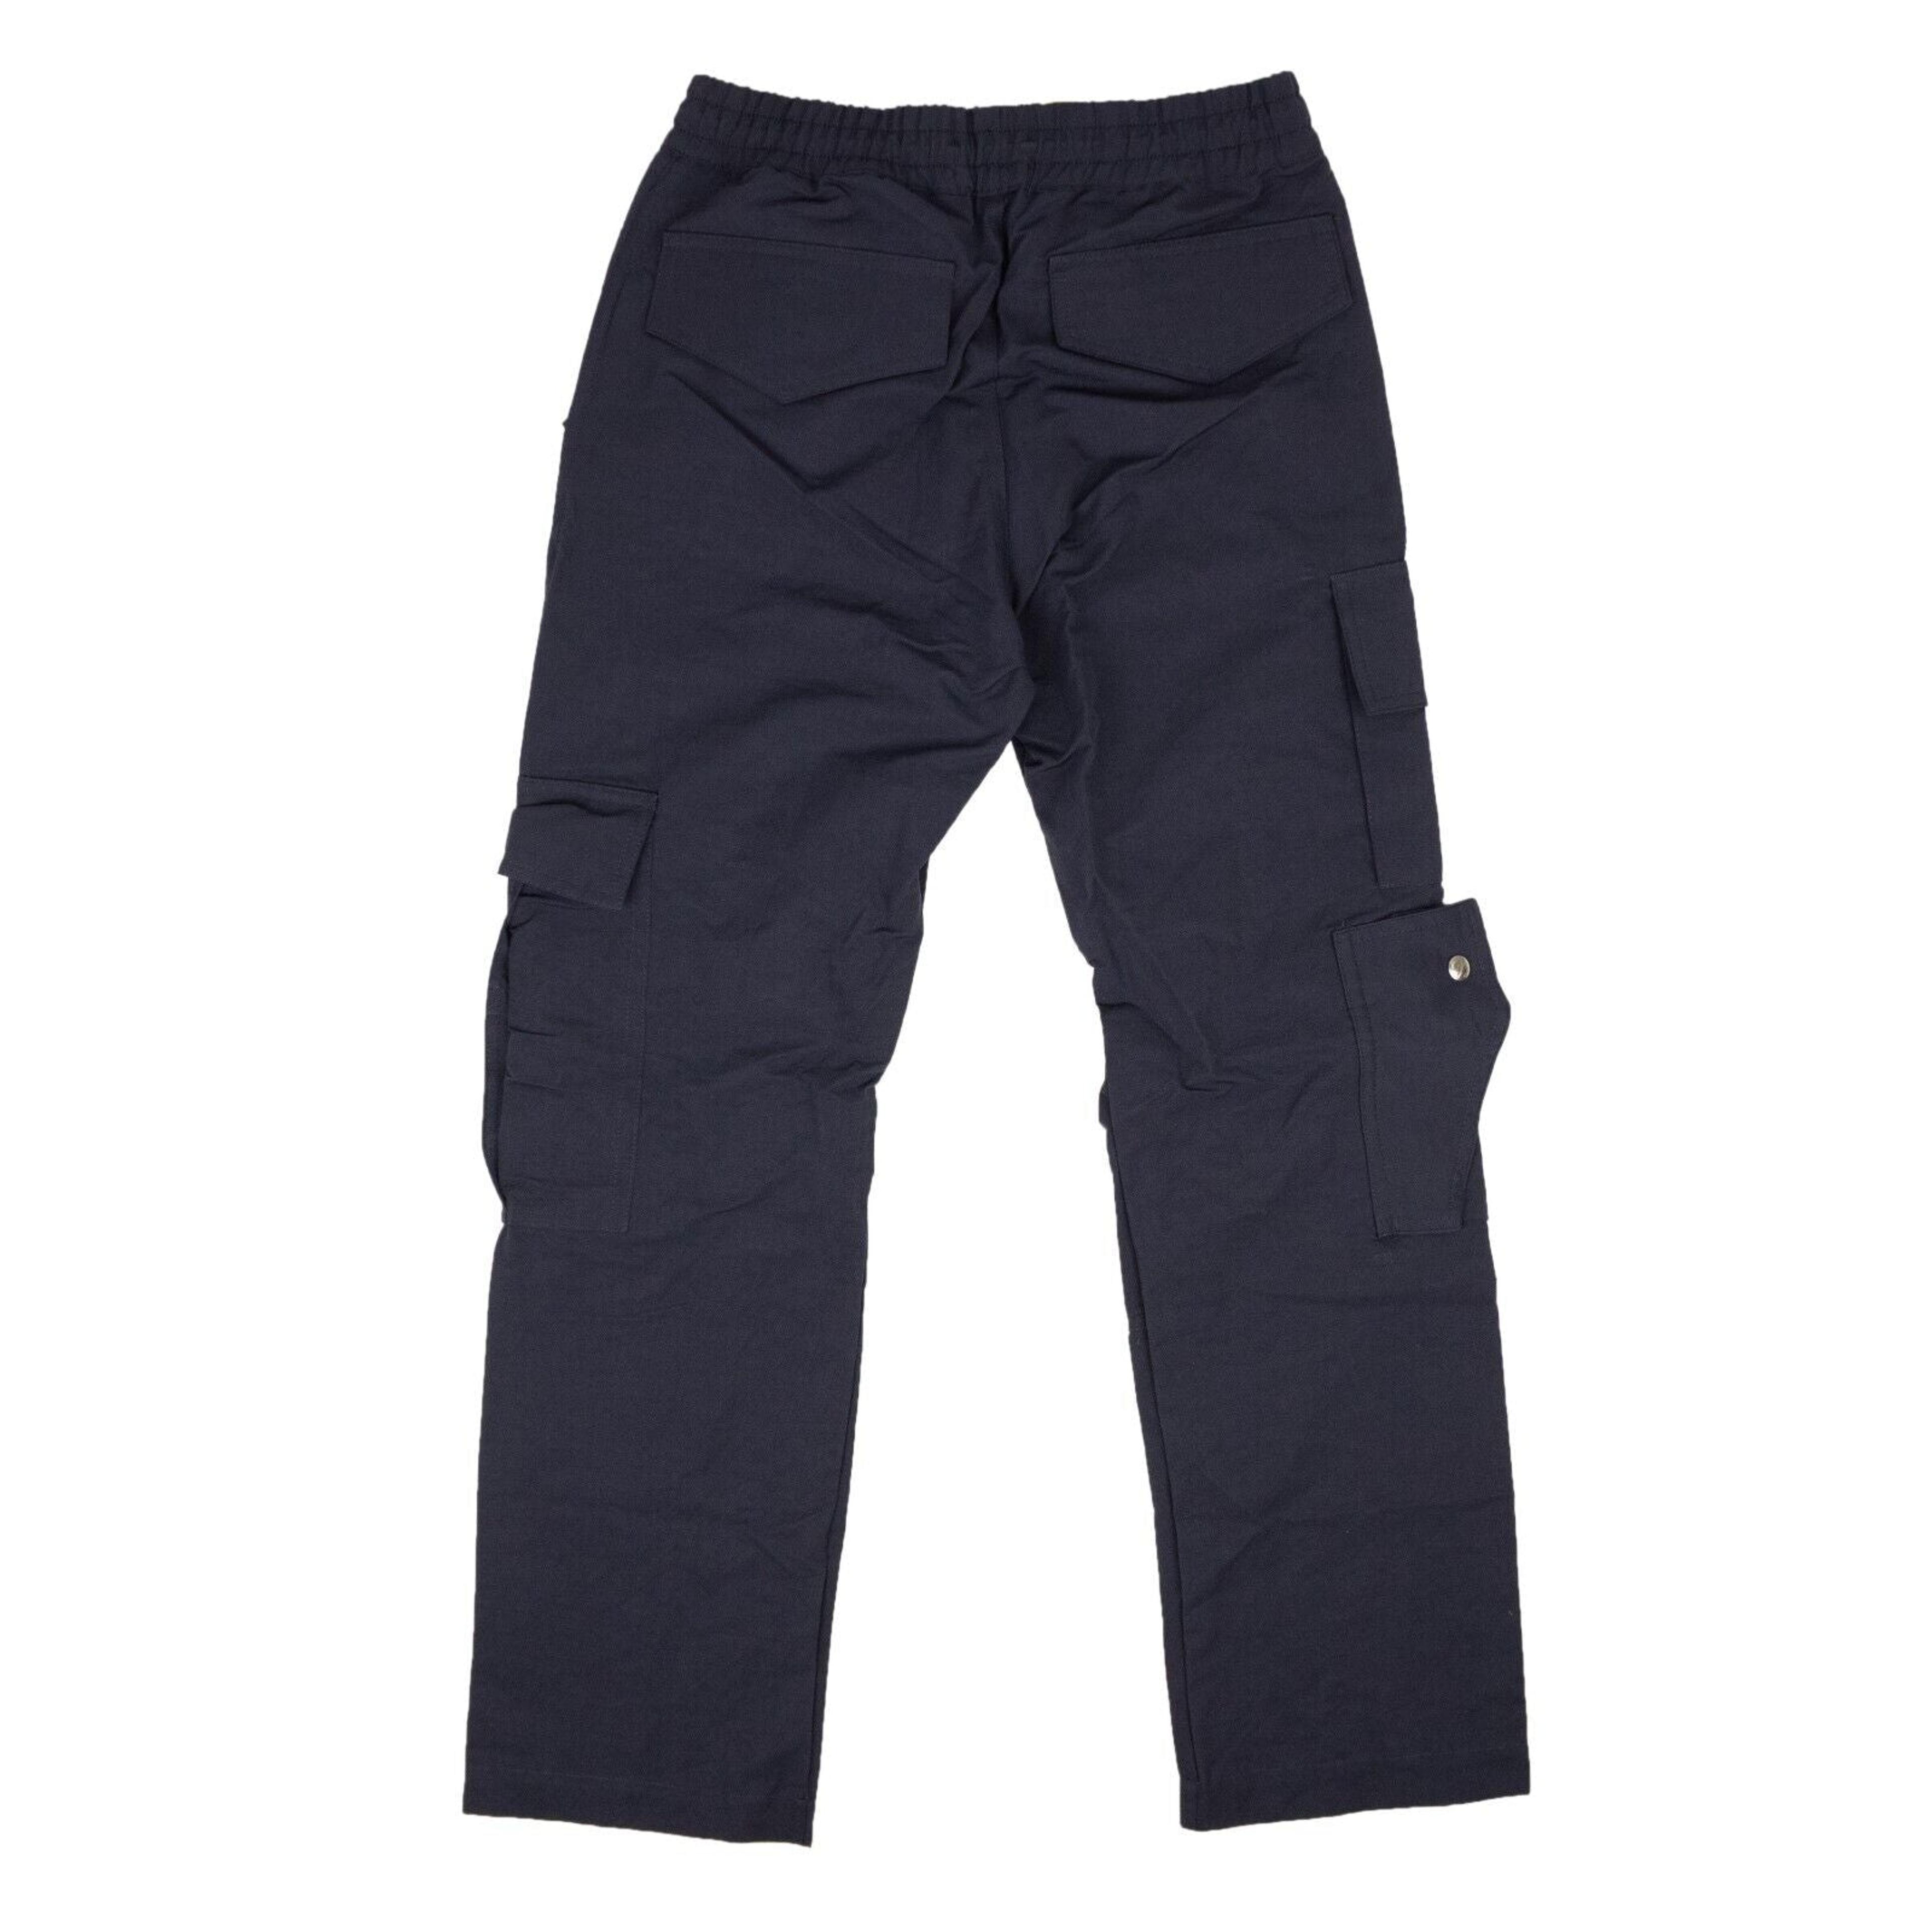 Alternate View 2 of Navy And Creme Polyester Gabardine Cargo Pants